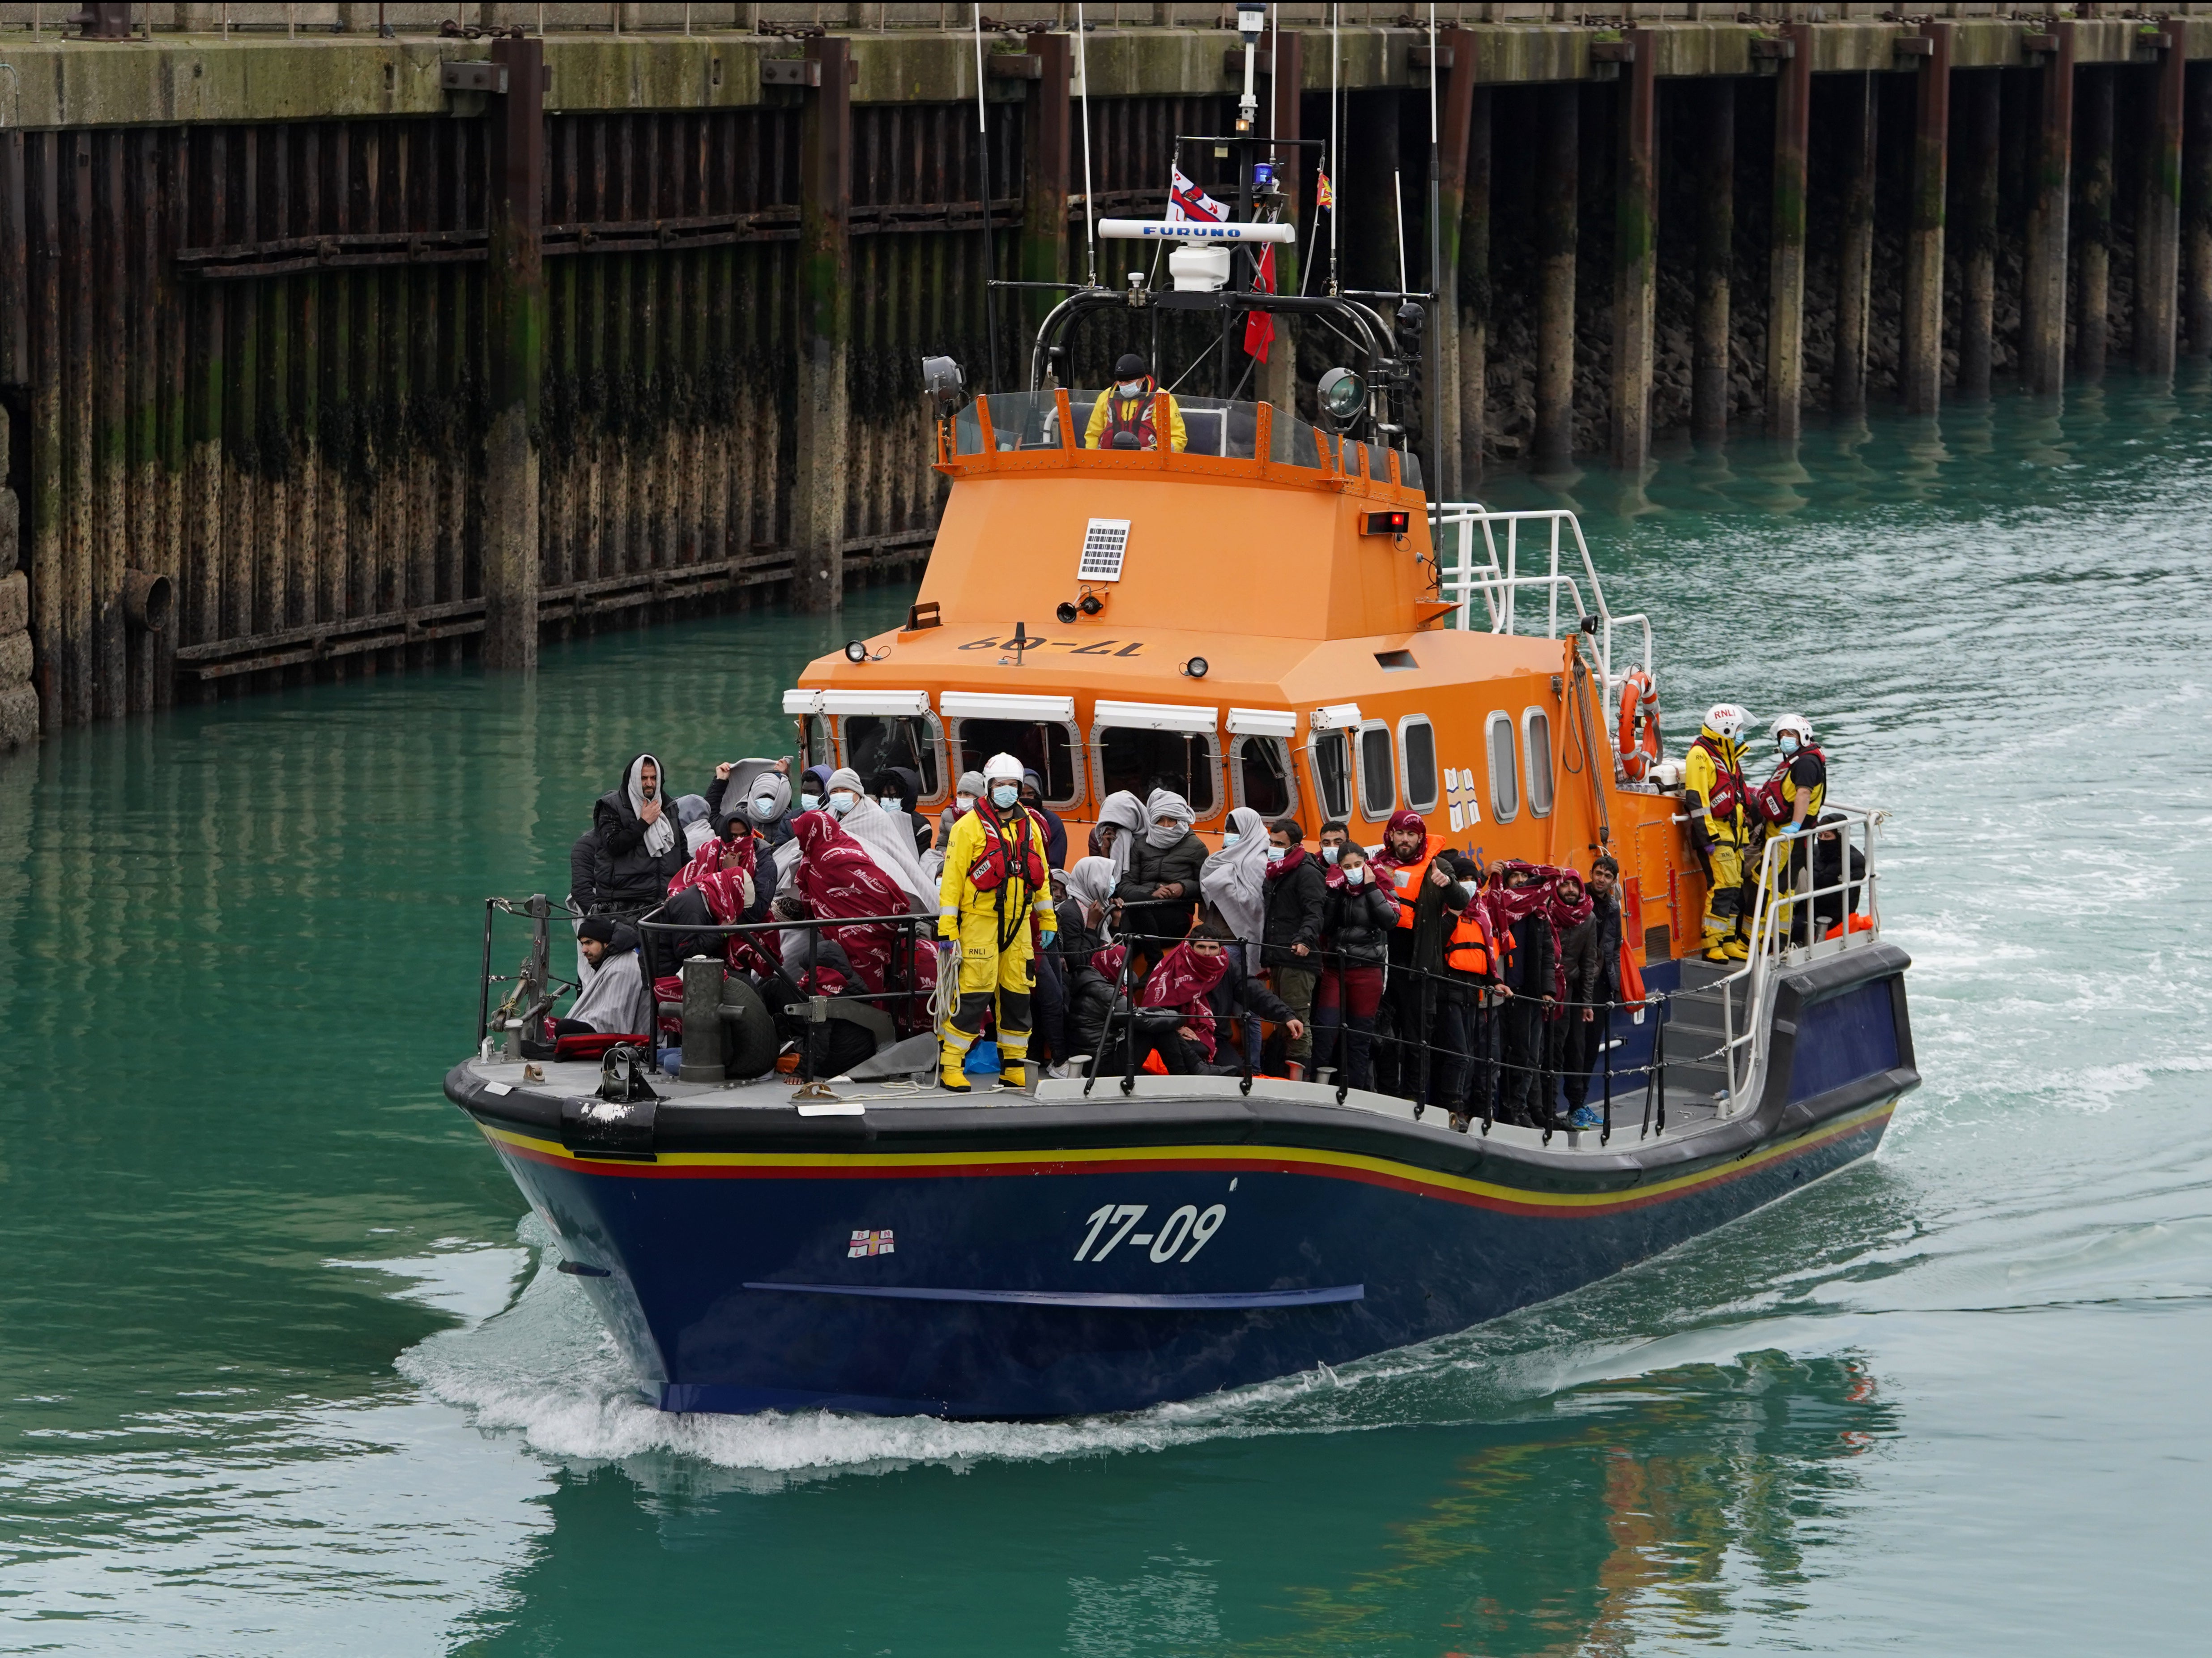 A group of people believed to be migrants intercepted in the Channel are brought into Dover by a lifeboat